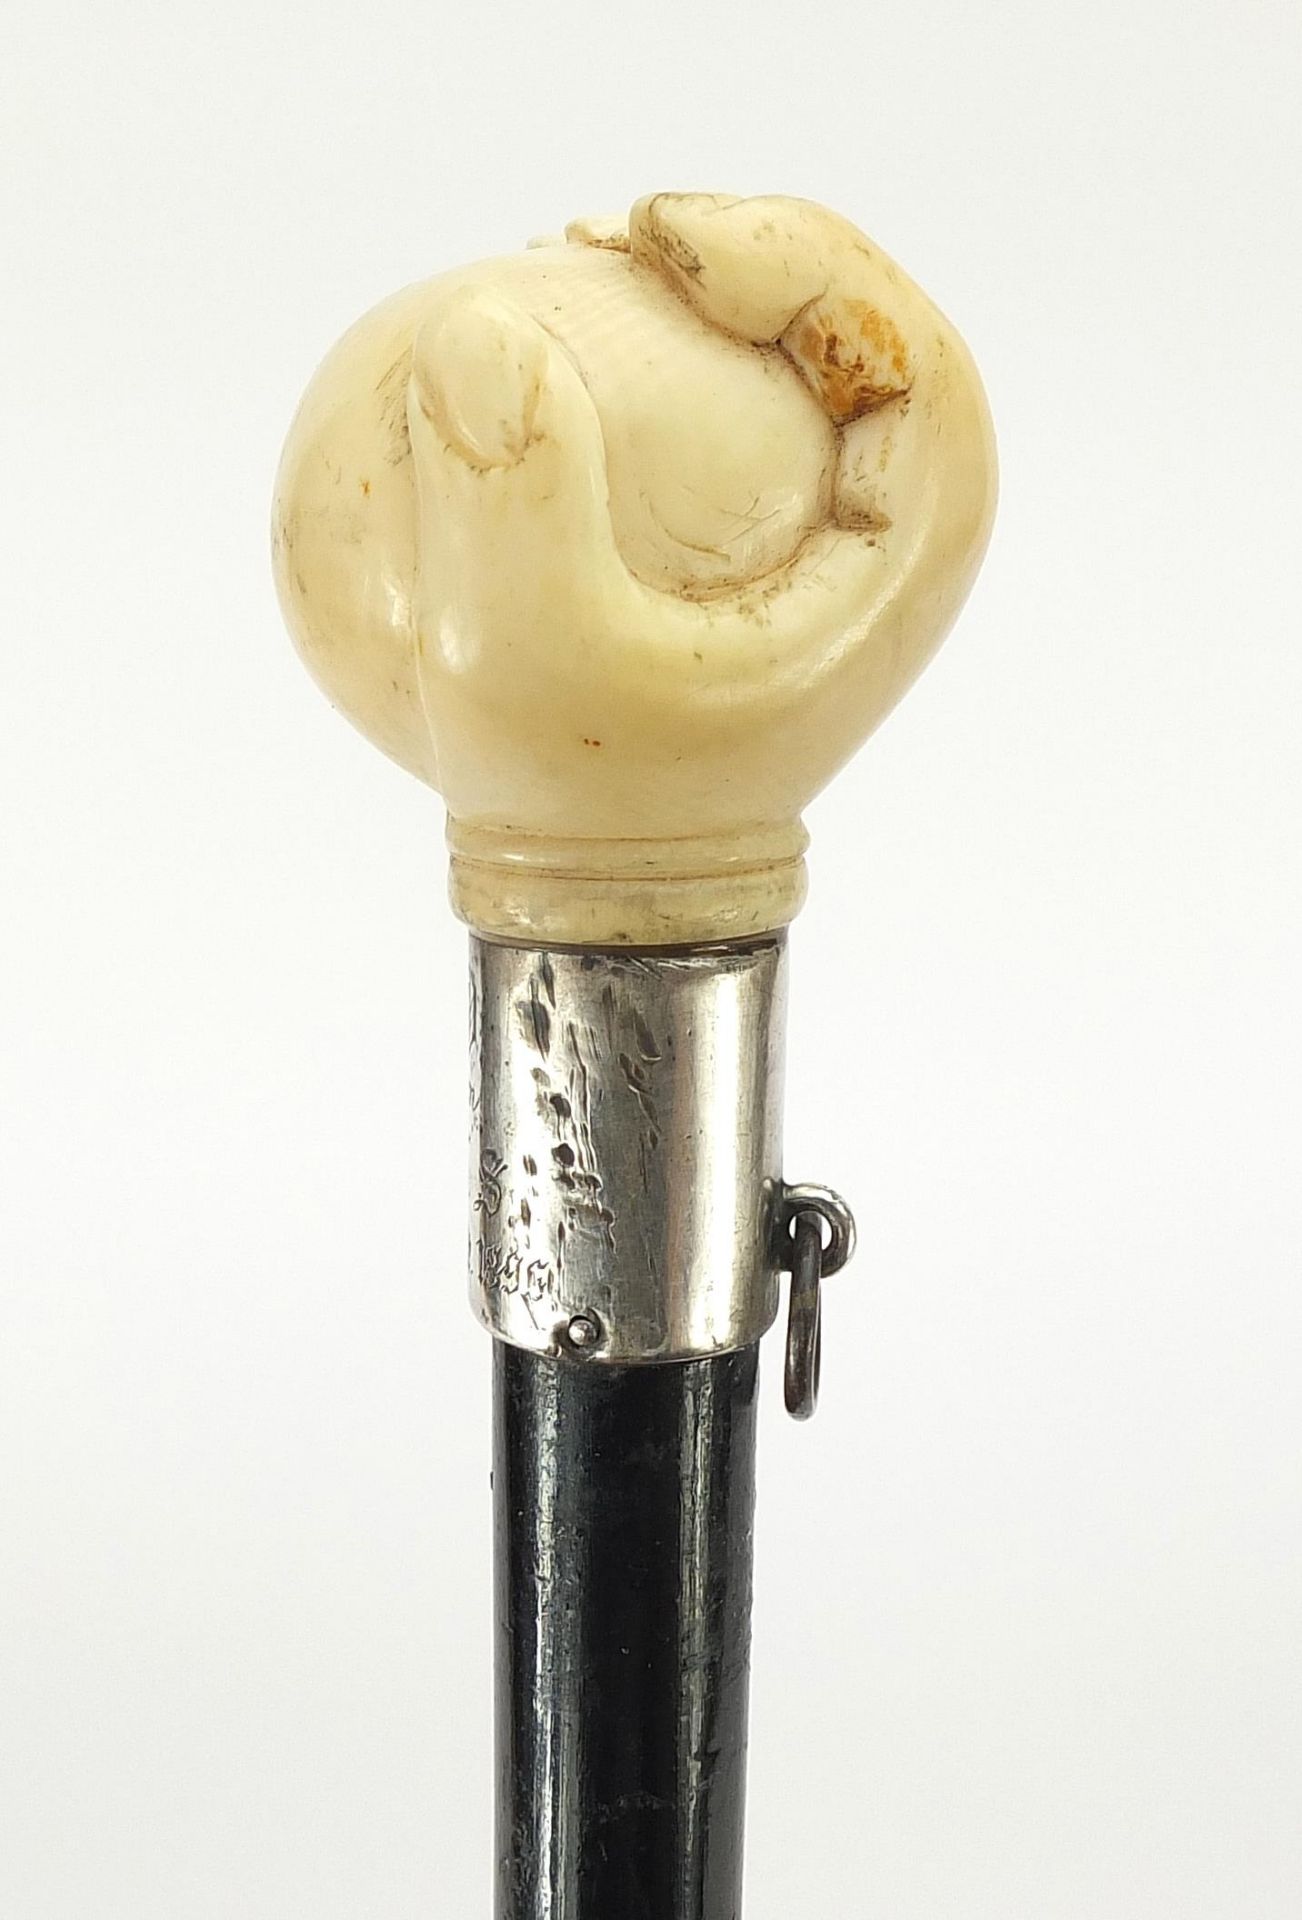 Ebony walking stick with carved silver pommel being in the form of a hand holding a ball, 90cm in